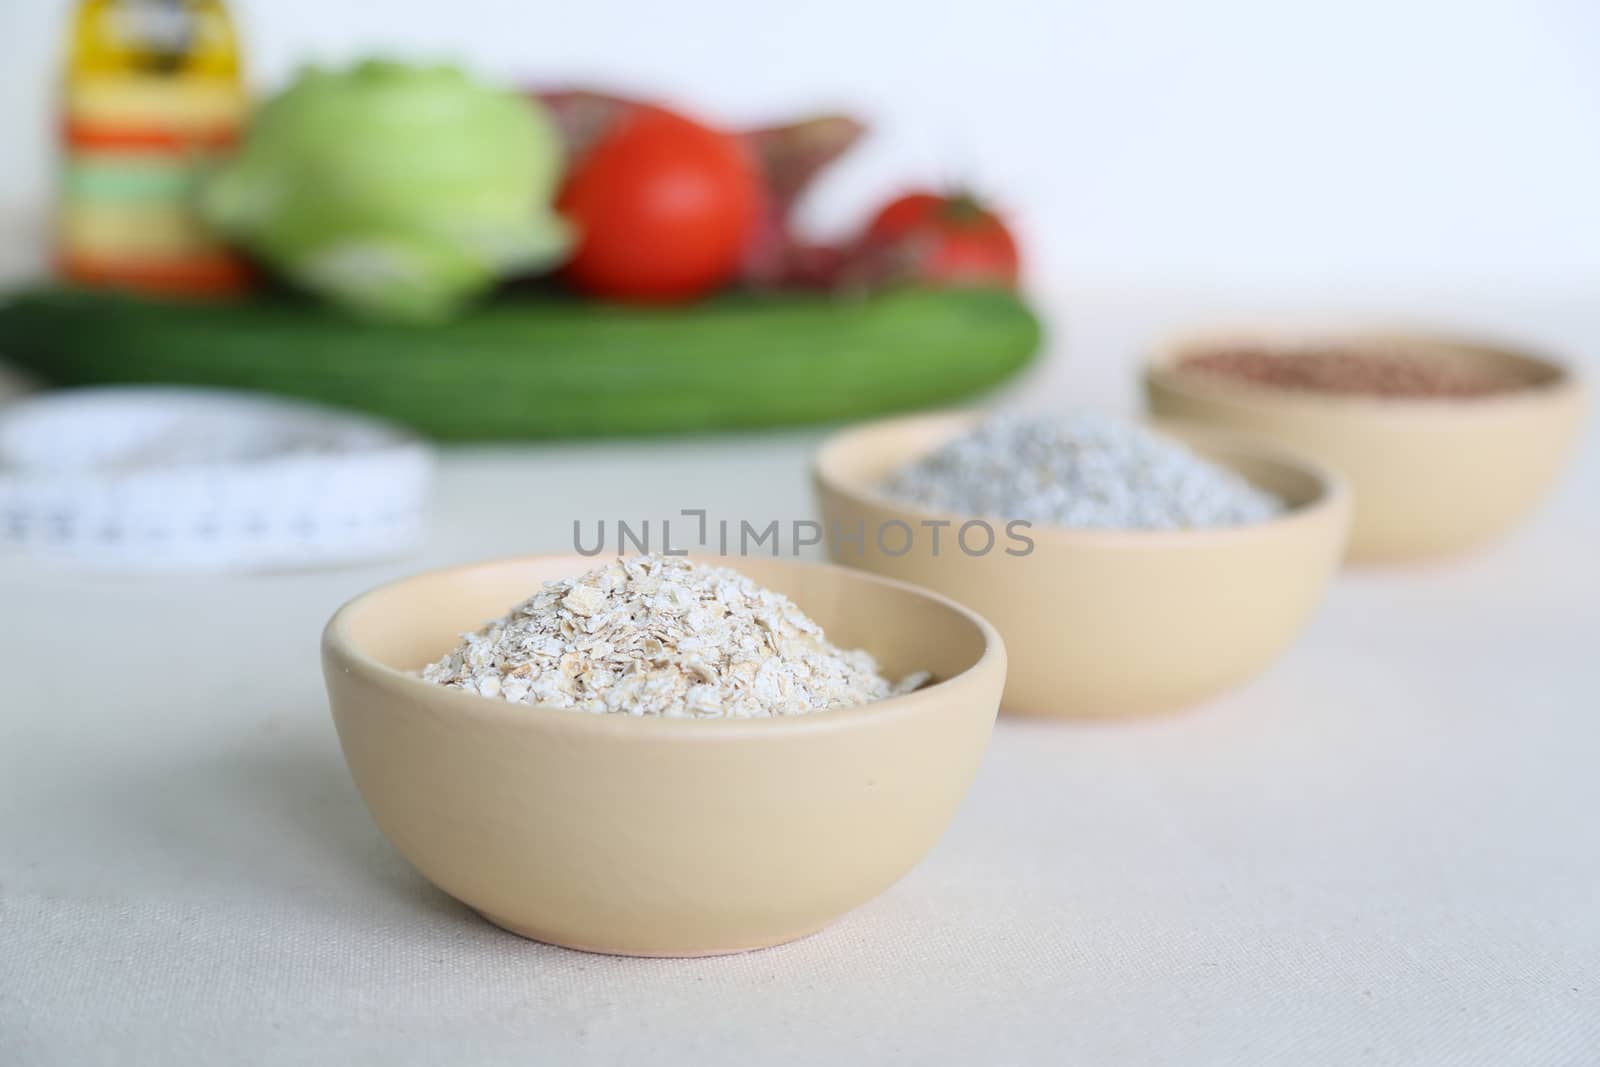 Flakes of oat cereal in the clay salad dish with vegetables in the background